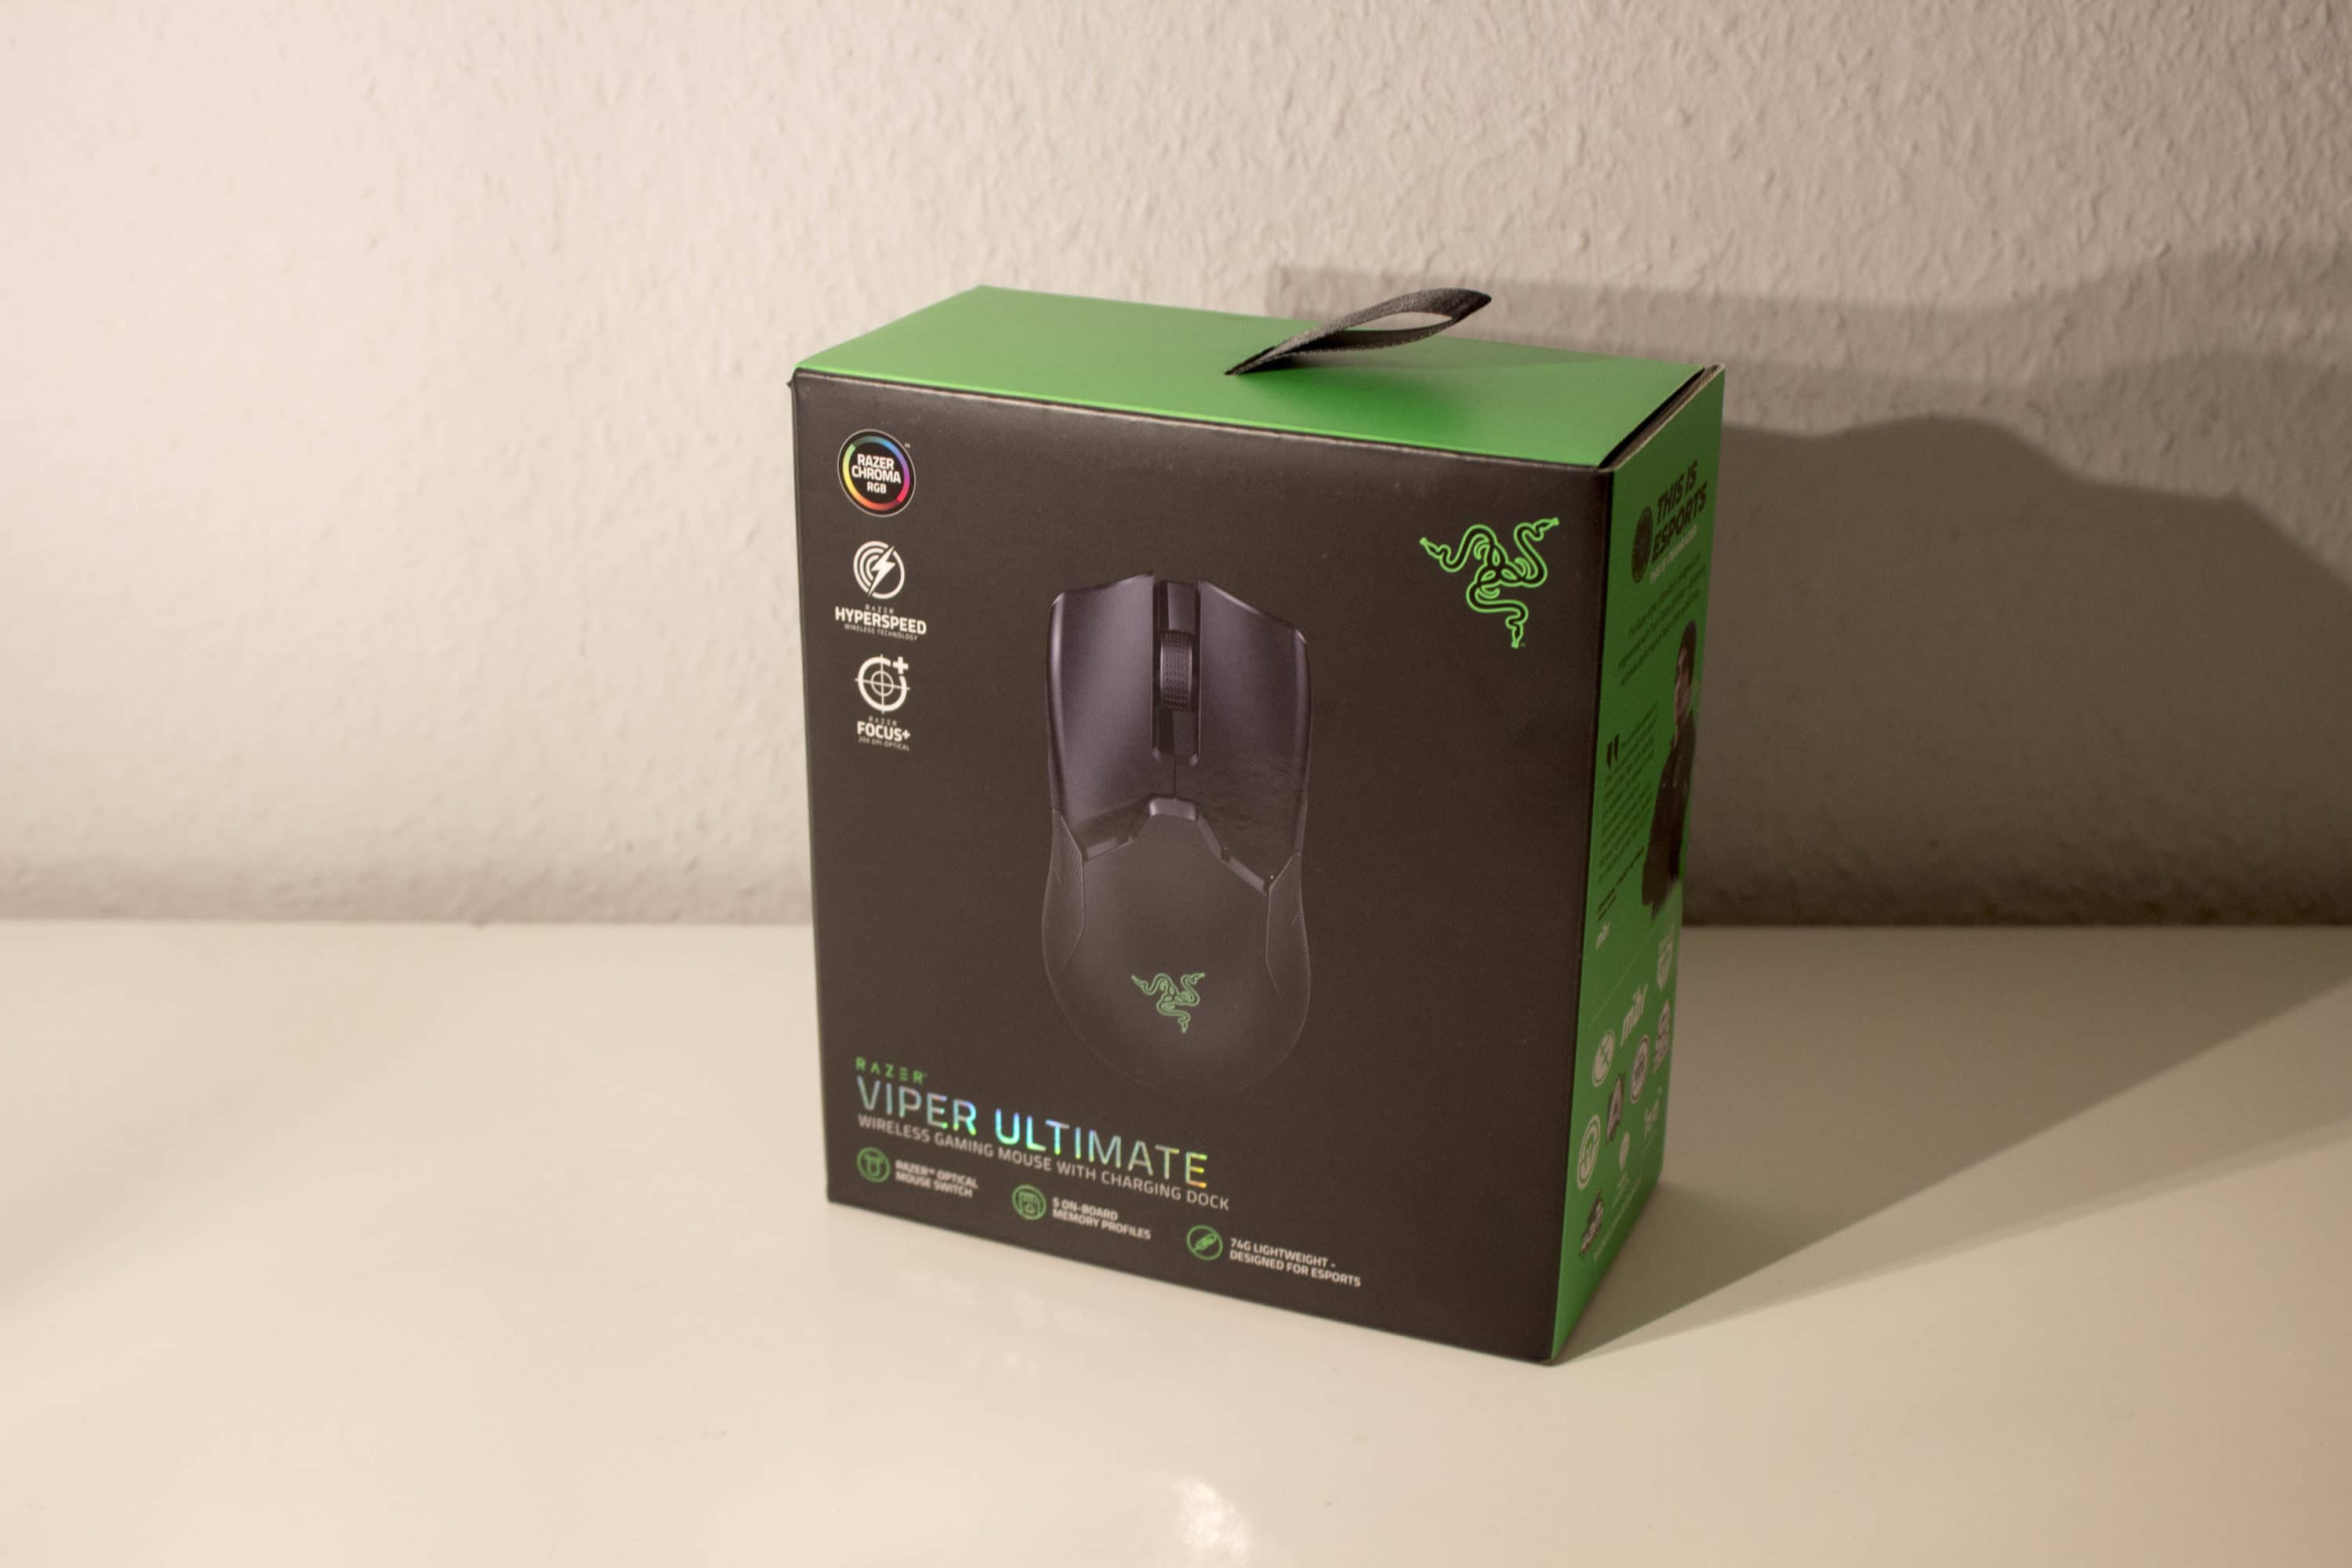 Gaming Mouse Razer Viper Ultimate Razer S New Wireless Technology Tested